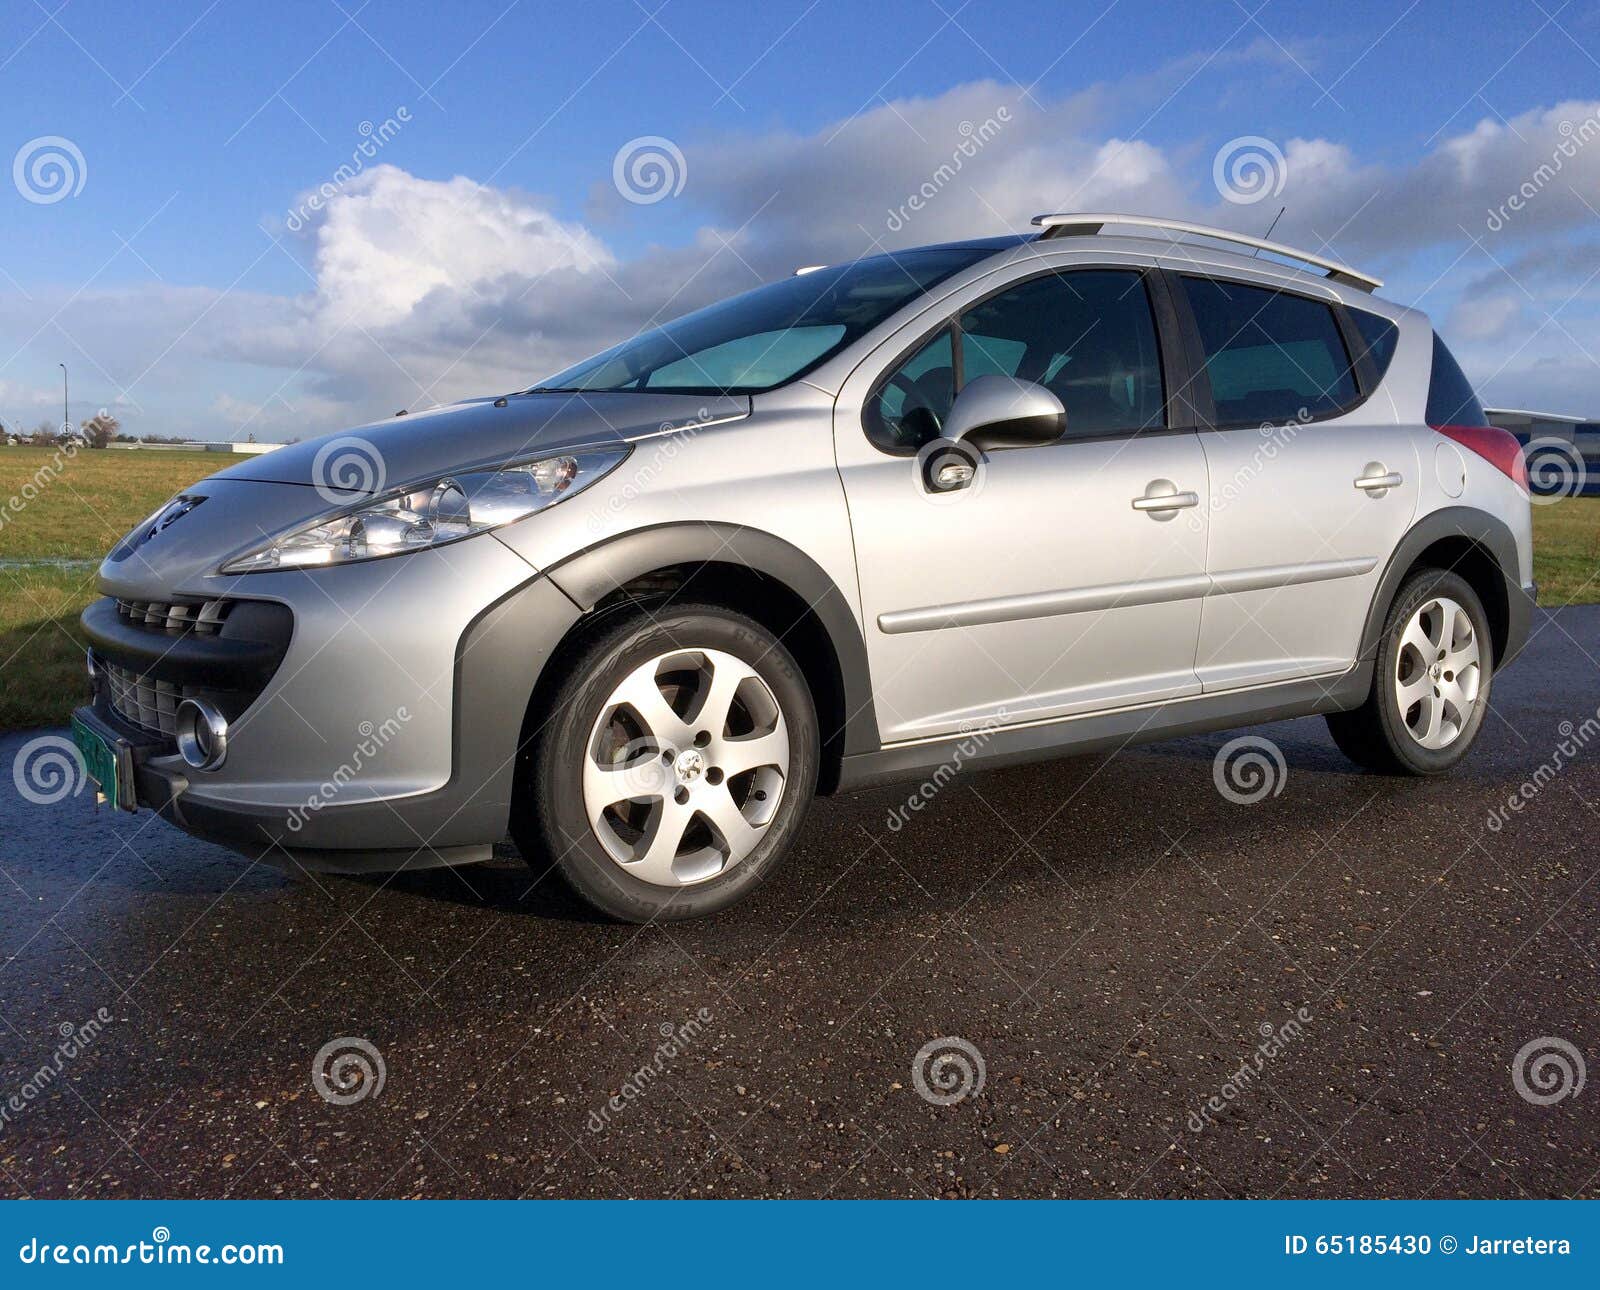 Peugeot 207 SW (estate) Sport Outdoor 1. 6 VTi XS Editorial Image - Image  of gray, outdoors: 65185430